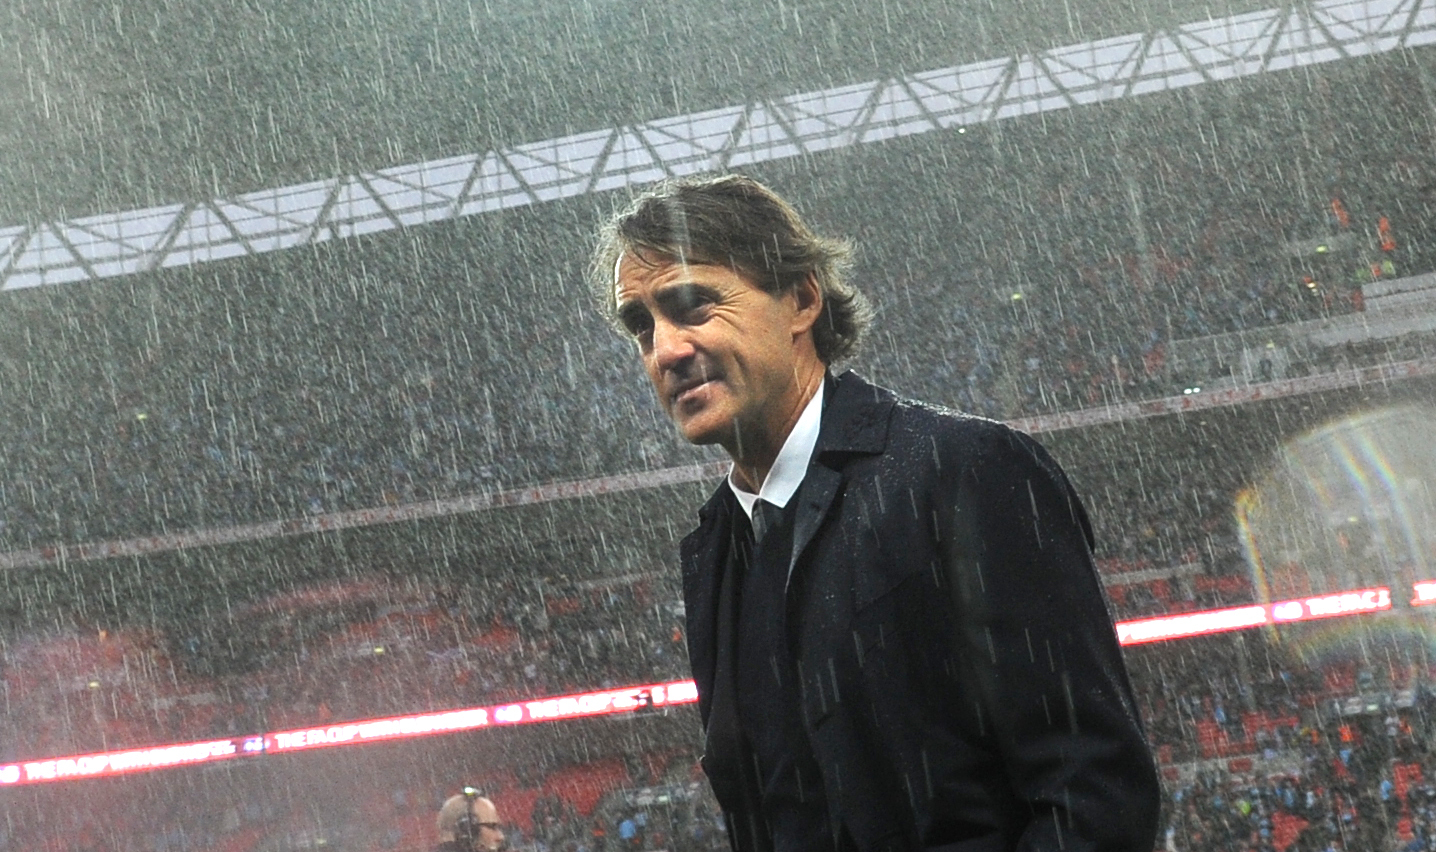 Roberto Mancini was manager of Manchester City for the majority of a period where the club are alleged to have breached rules related to the provision of details of a manager’s full salary.